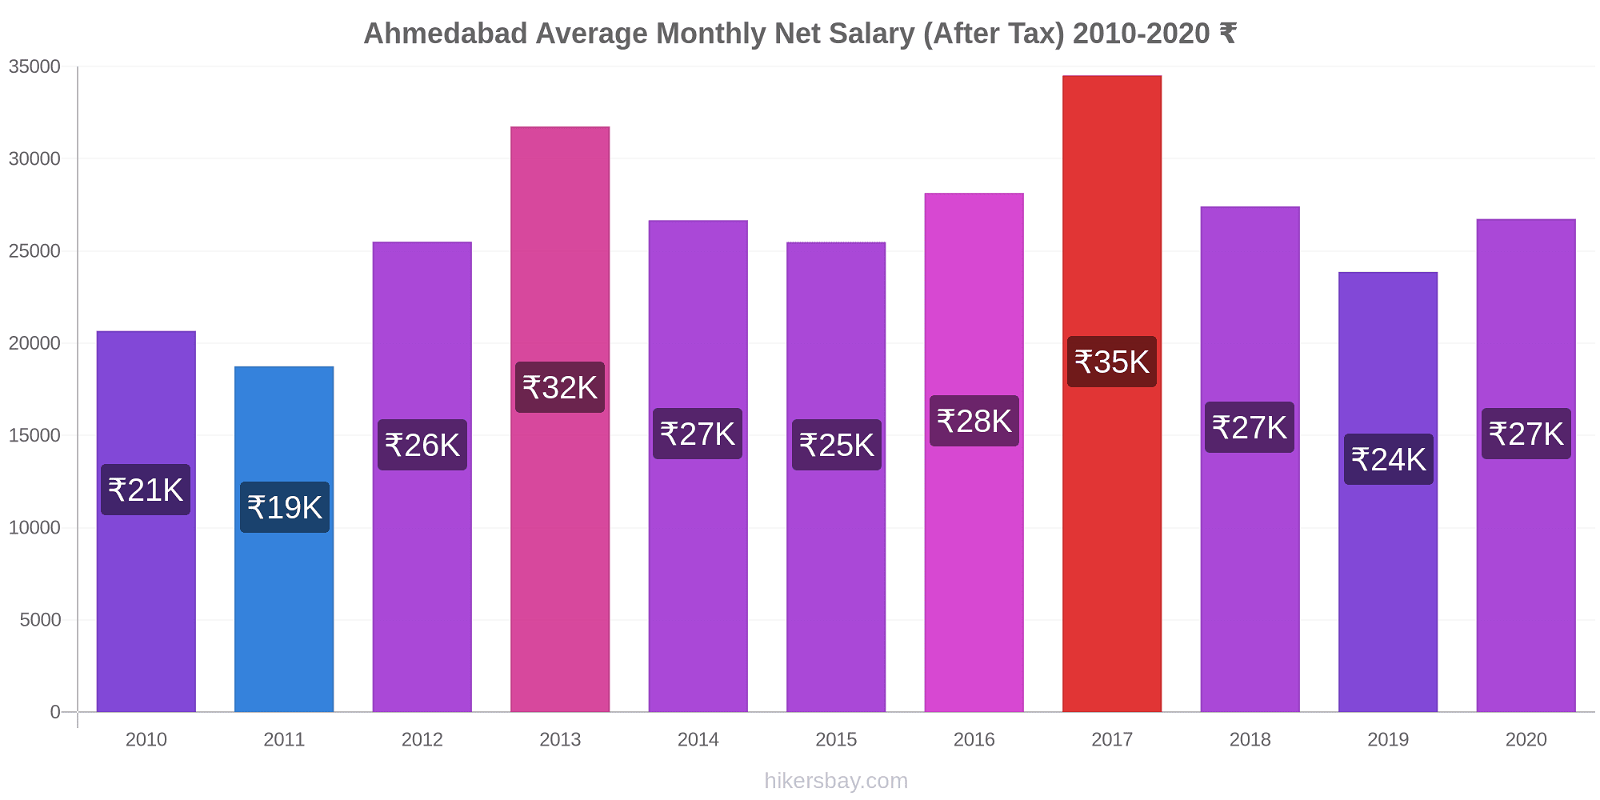 Ahmedabad price changes Average Monthly Net Salary (After Tax) hikersbay.com